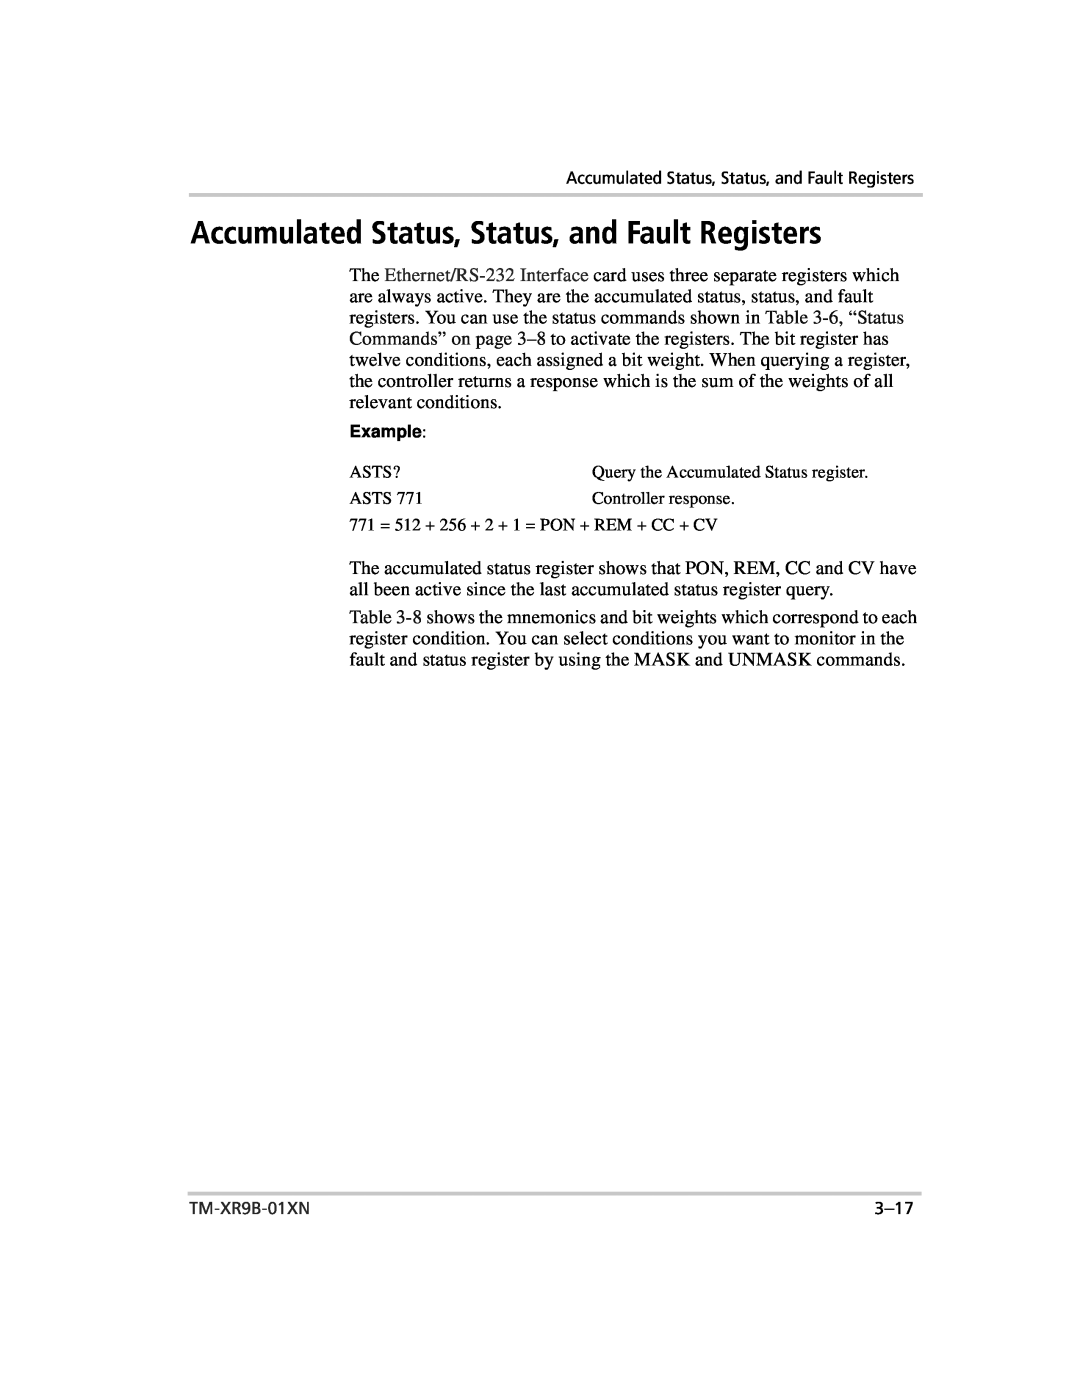 Xantrex Technology ENET-XFR3 manual Accumulated Status, Status, and Fault Registers, Example 